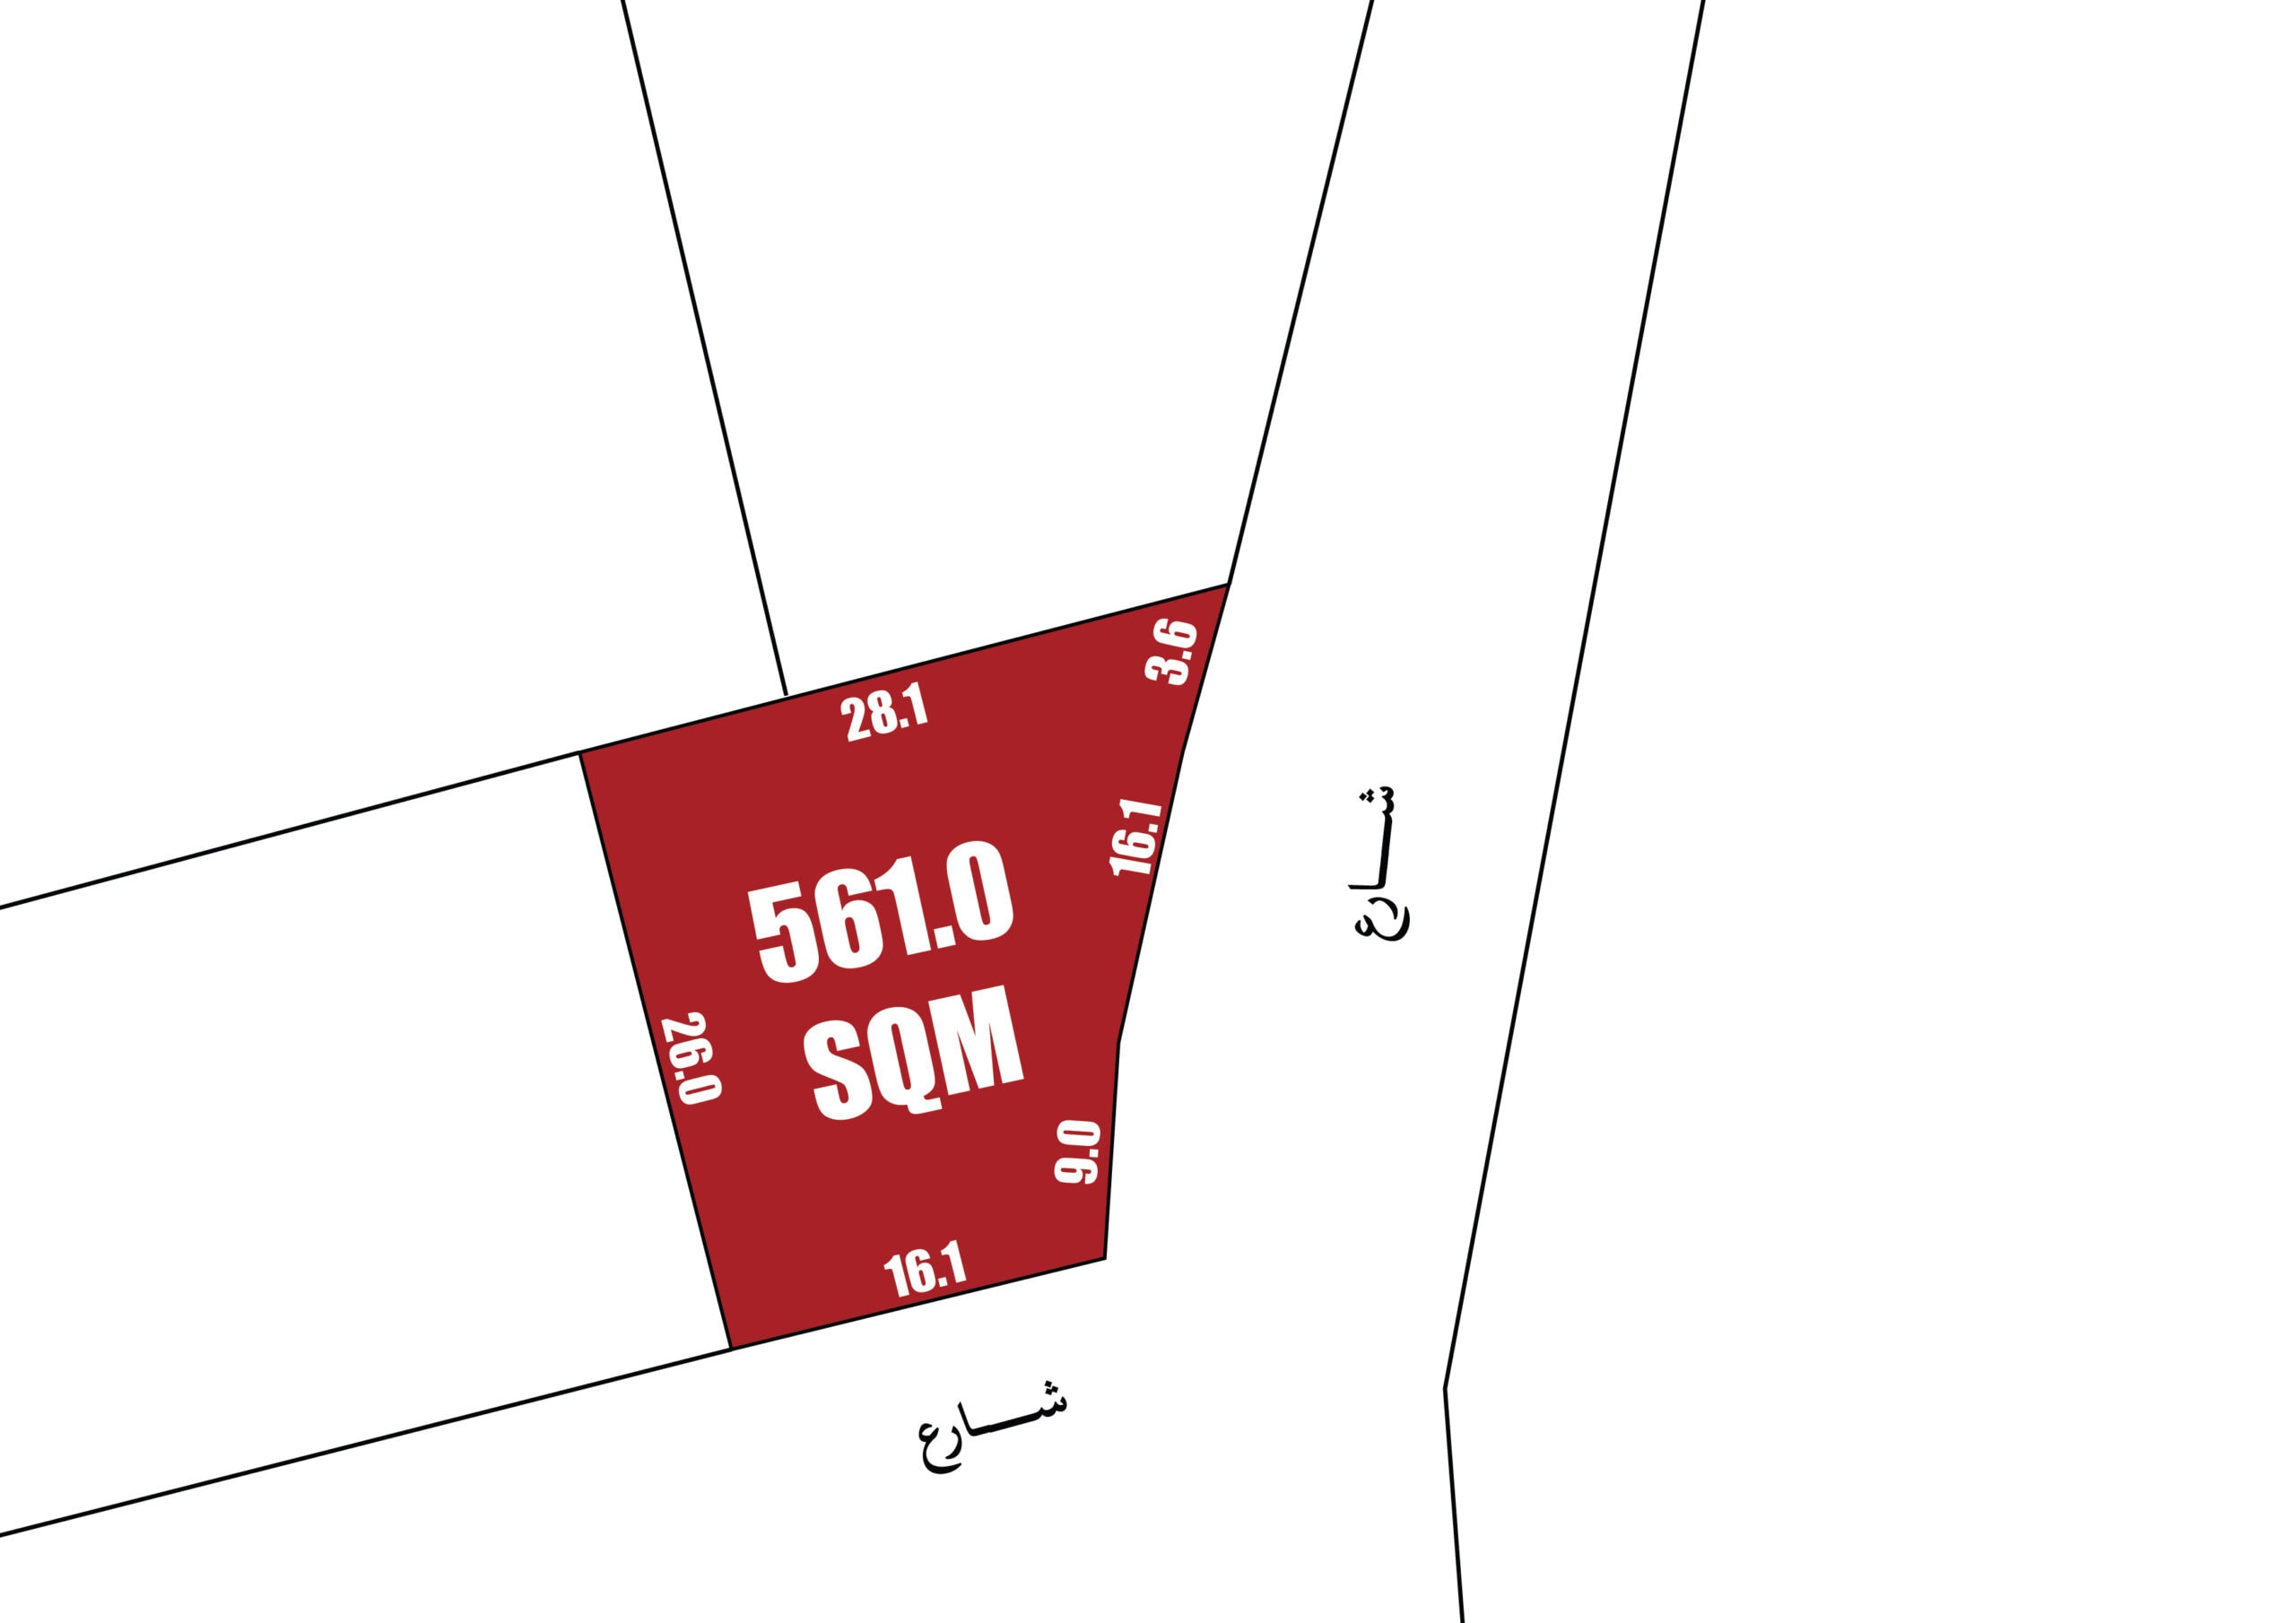 A diagram of spacious land for sale, showing a red highlighted area labeled 